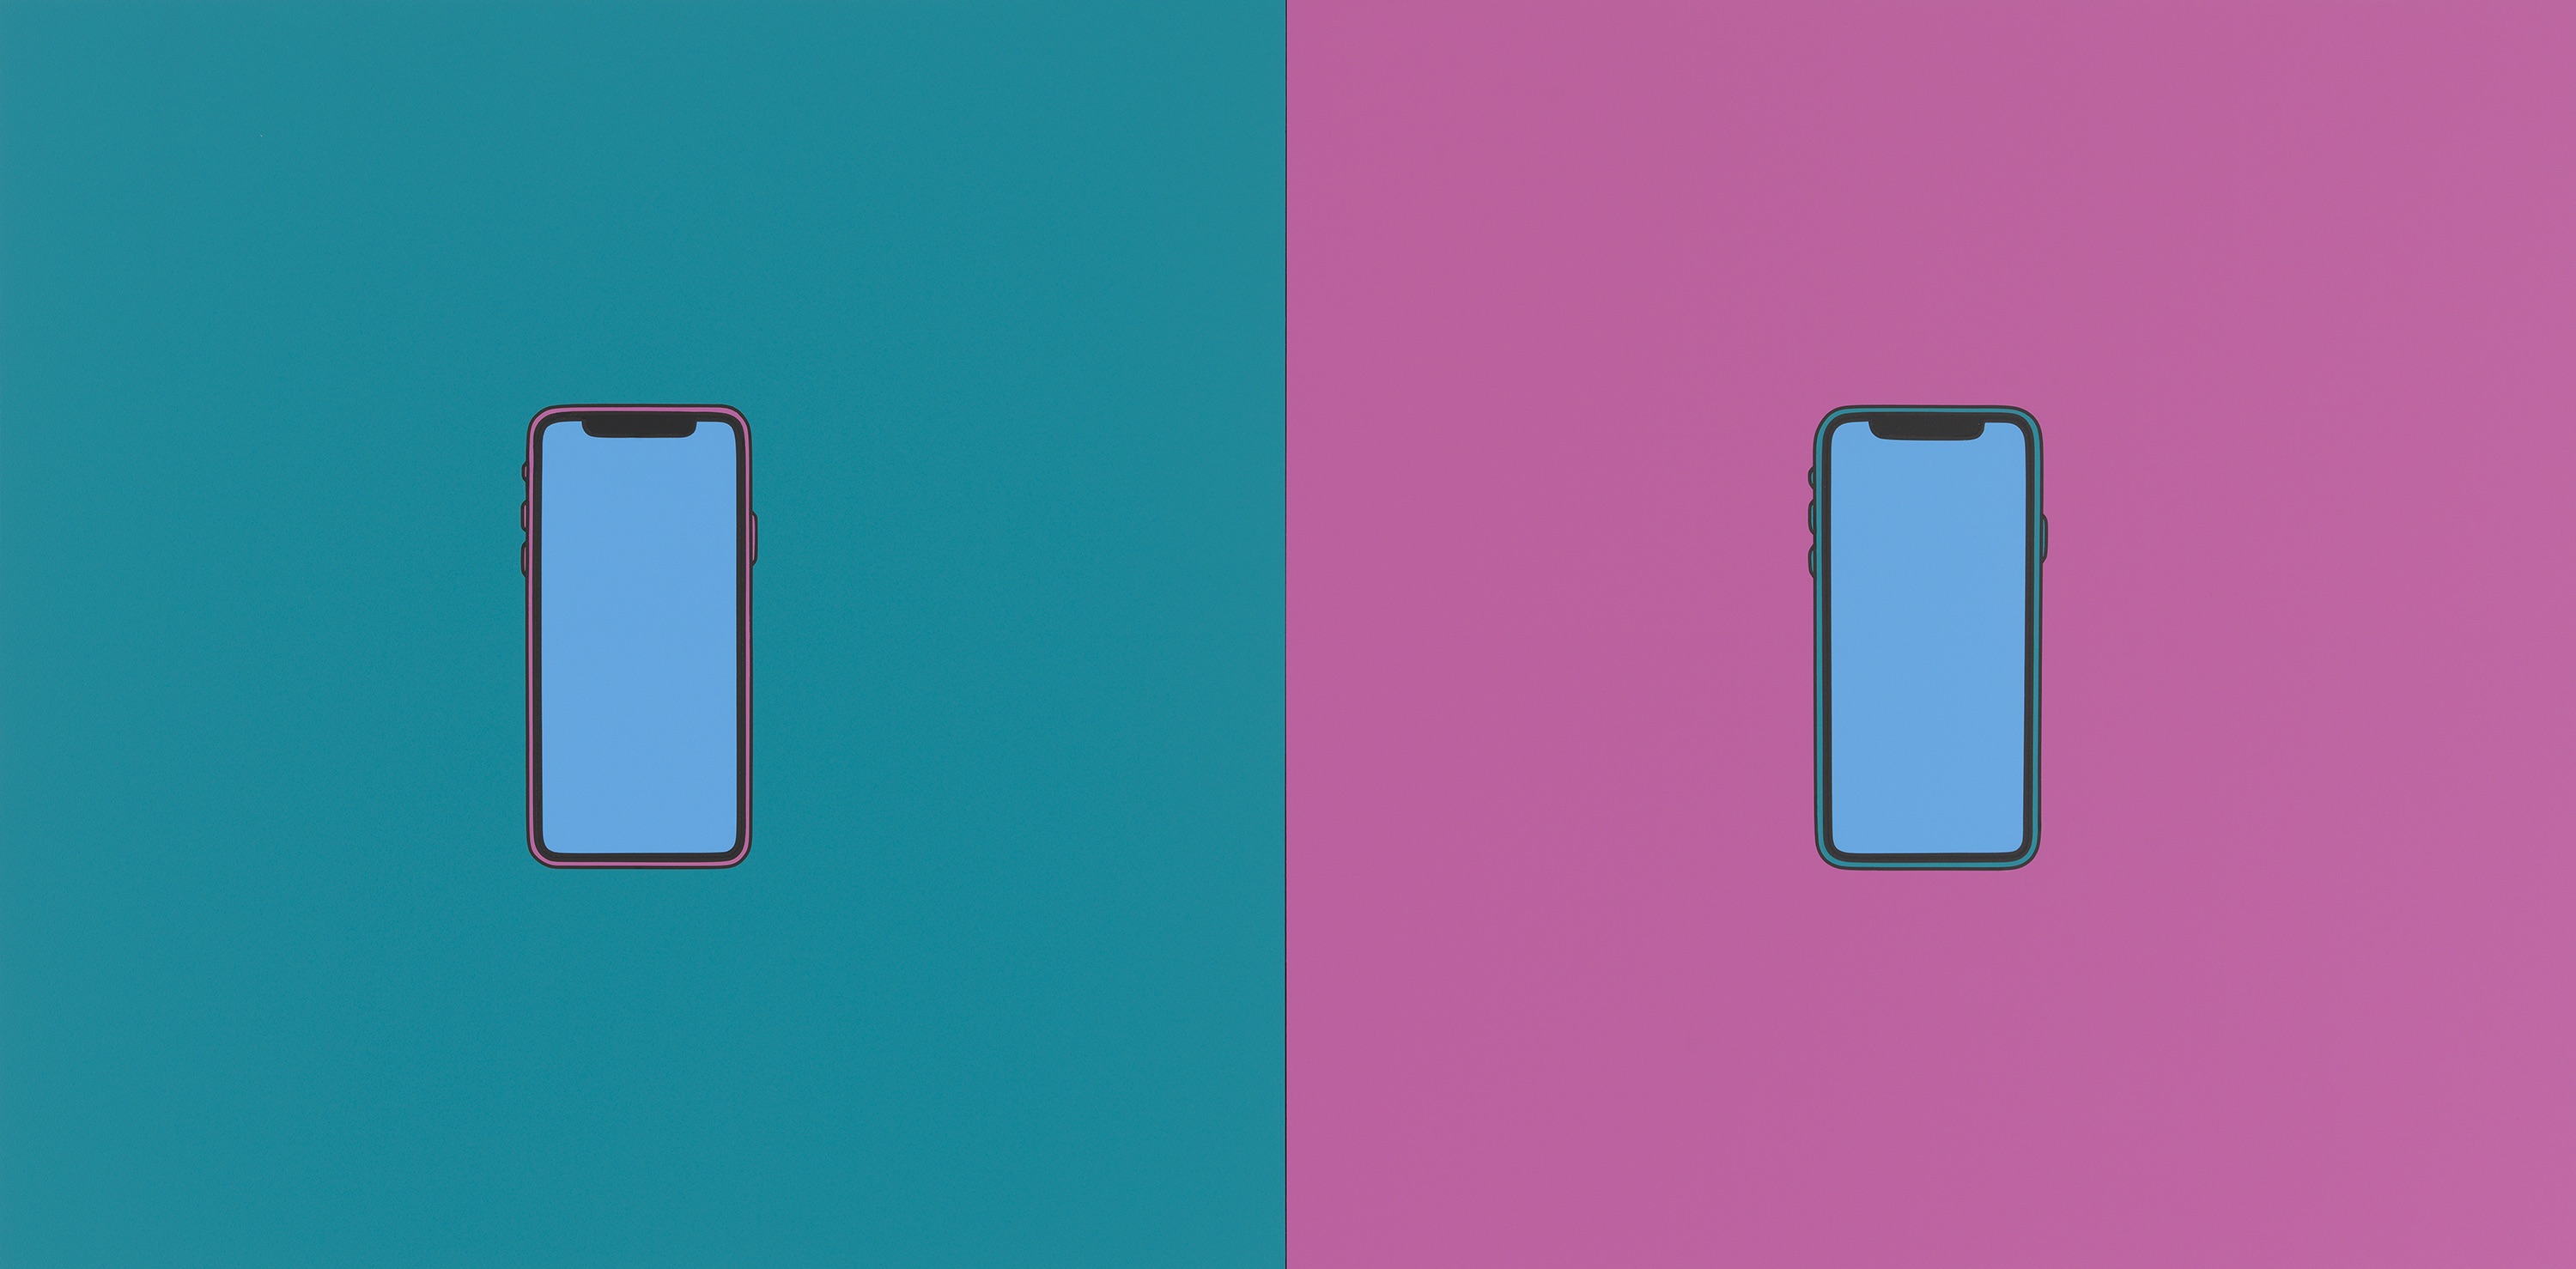 Double Take (iPhone), 2018, Â© Michael Craig-Martin Courtesy of the artist and Gagosian Photo: Mike Bruce